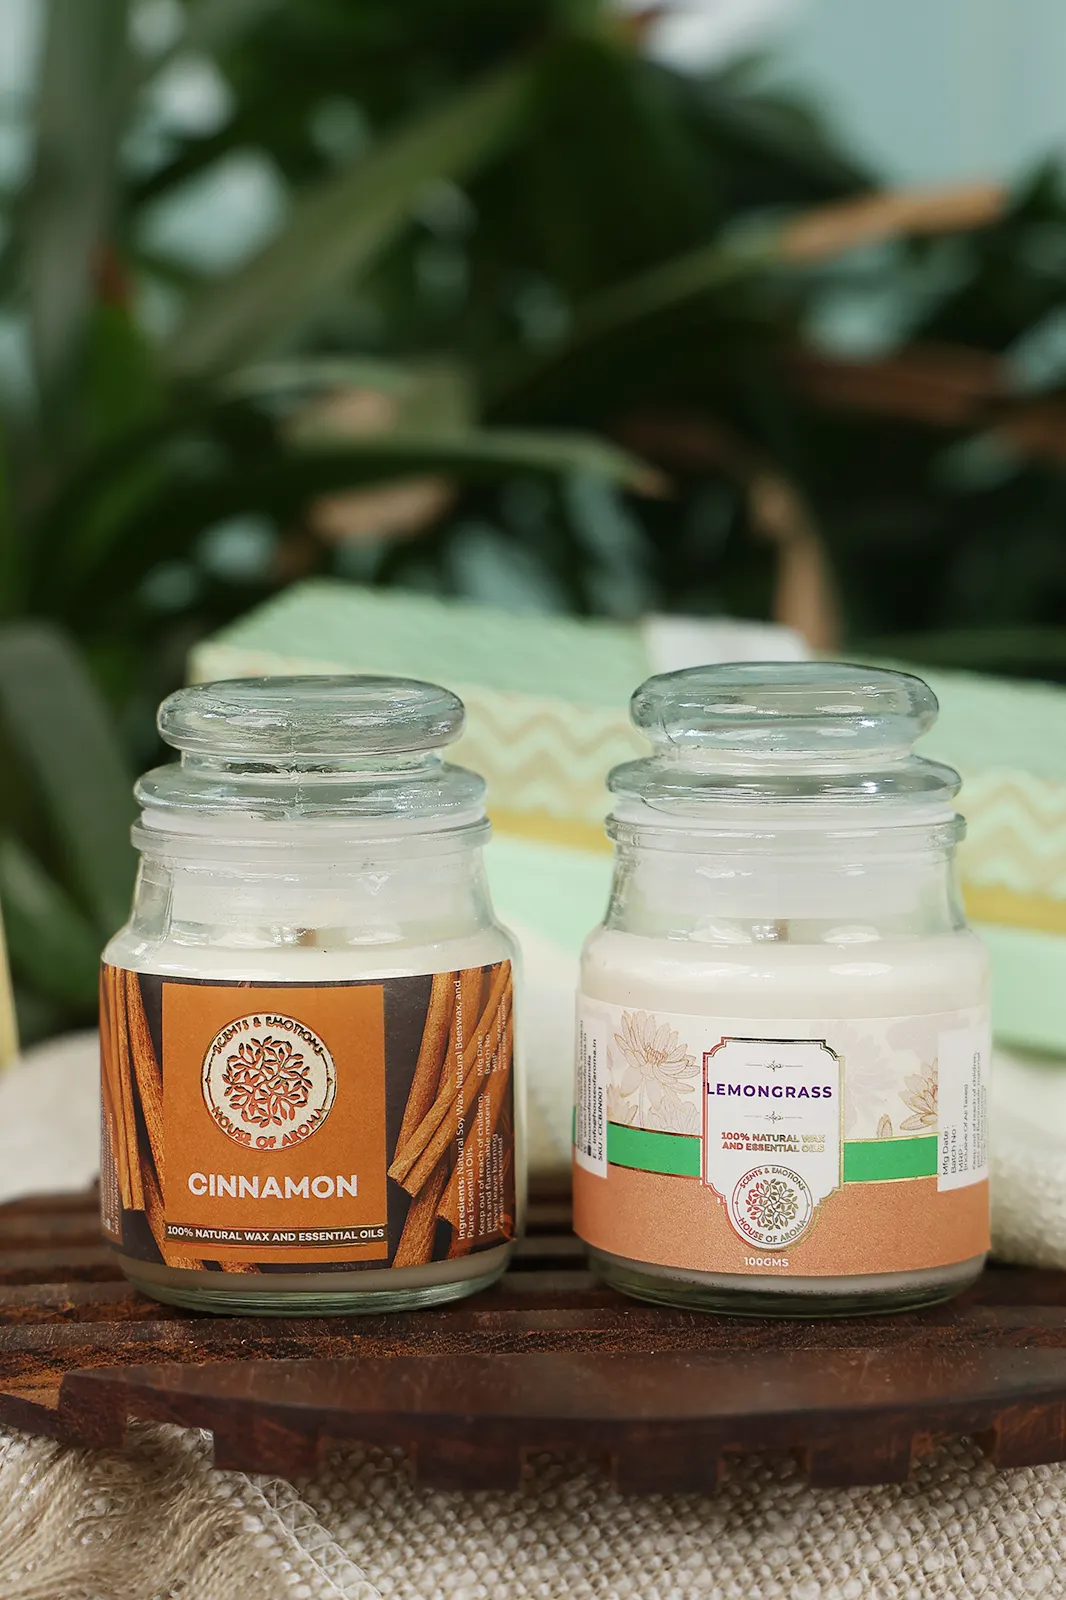 aromatherapy candles combo pack, aromatherapy candles, combo gift pack, fragrance candles online, scented candles combo, aromatherapy with candles, candle aroma, organic candles, aromatherapy candles scents, organic candles, candles for Diwali, natural scented candles, aromatherapy oil candle house of aroma